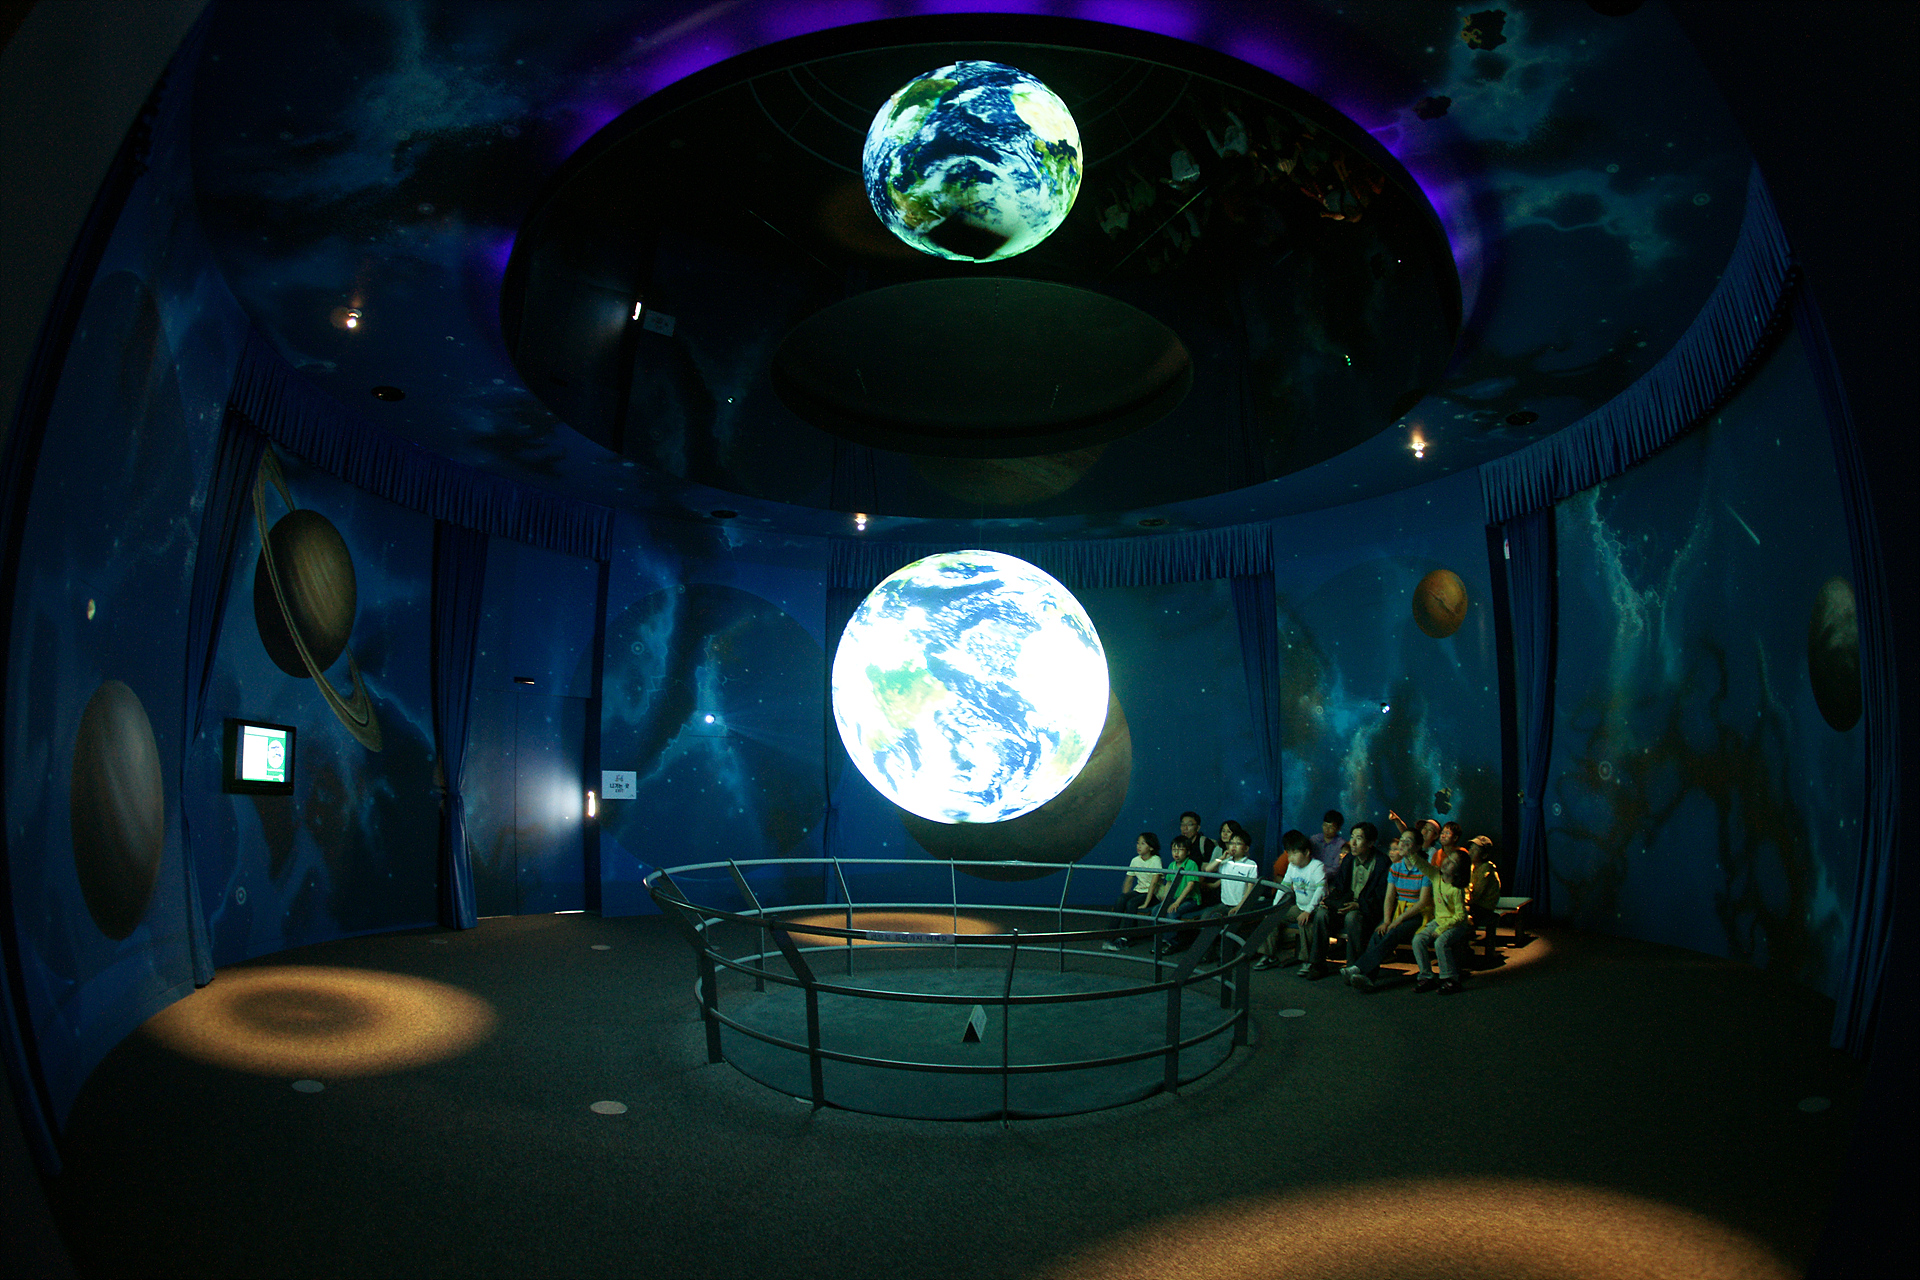 A group of people sit on benches to one side in a room watching Science On a Sphere. The walls of the room are painted with images of planets and nebulae. The Sphere is reflected in the ceiling by a fixture surrounding where it's mounted